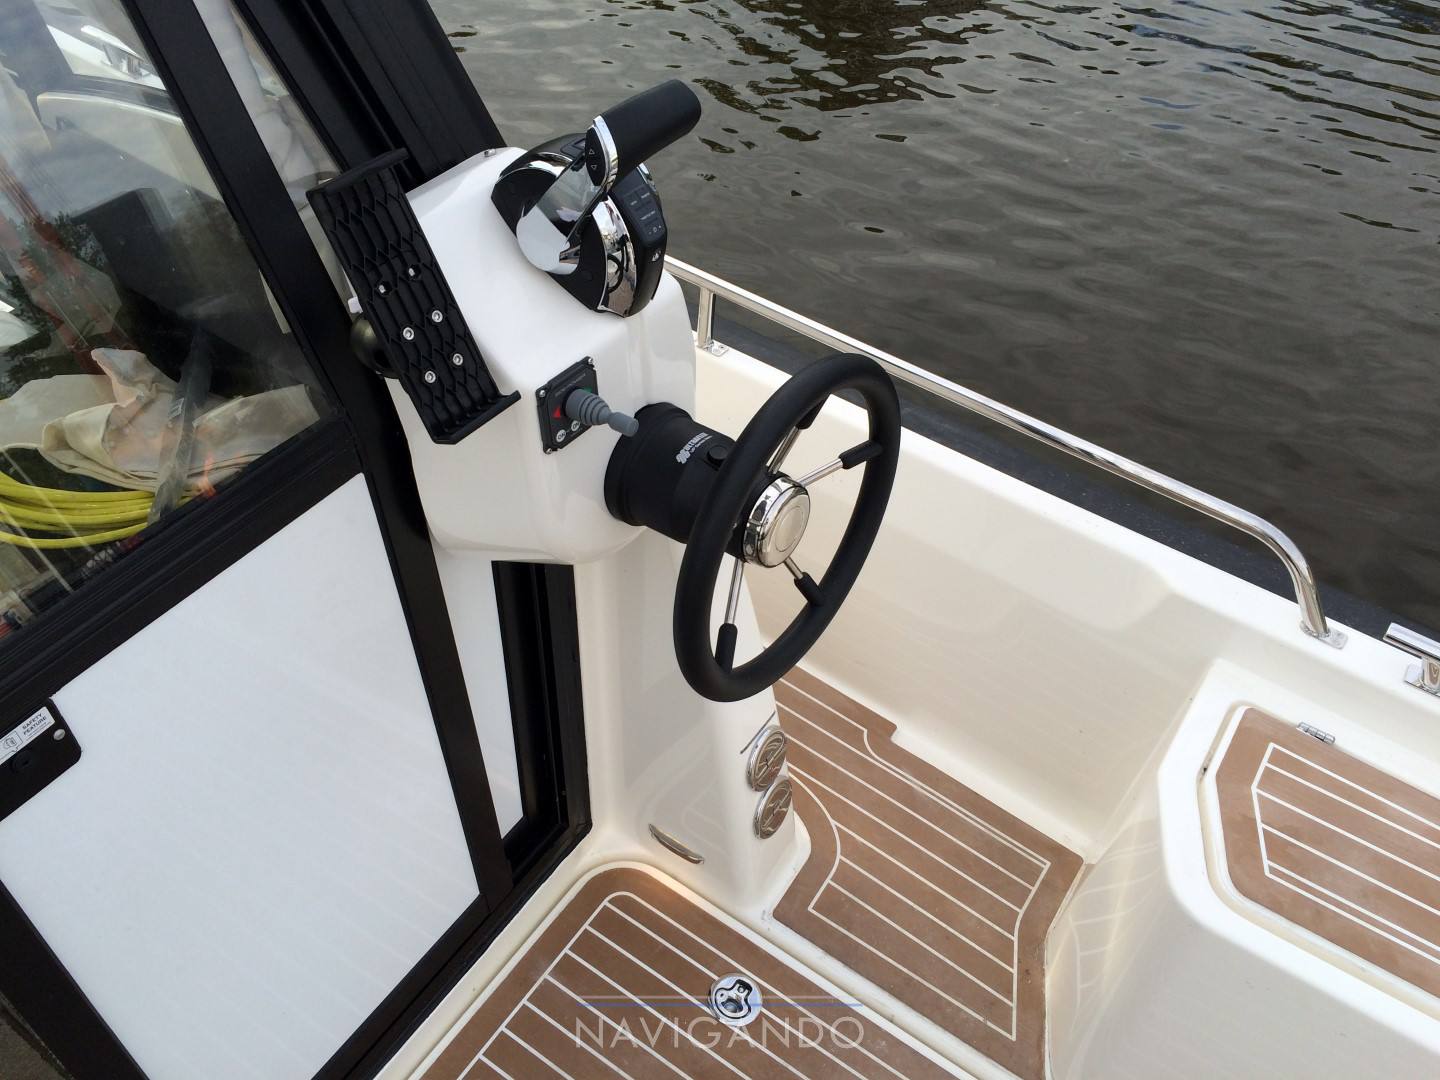 Arctic Commuter 25 Motor boat used for sale